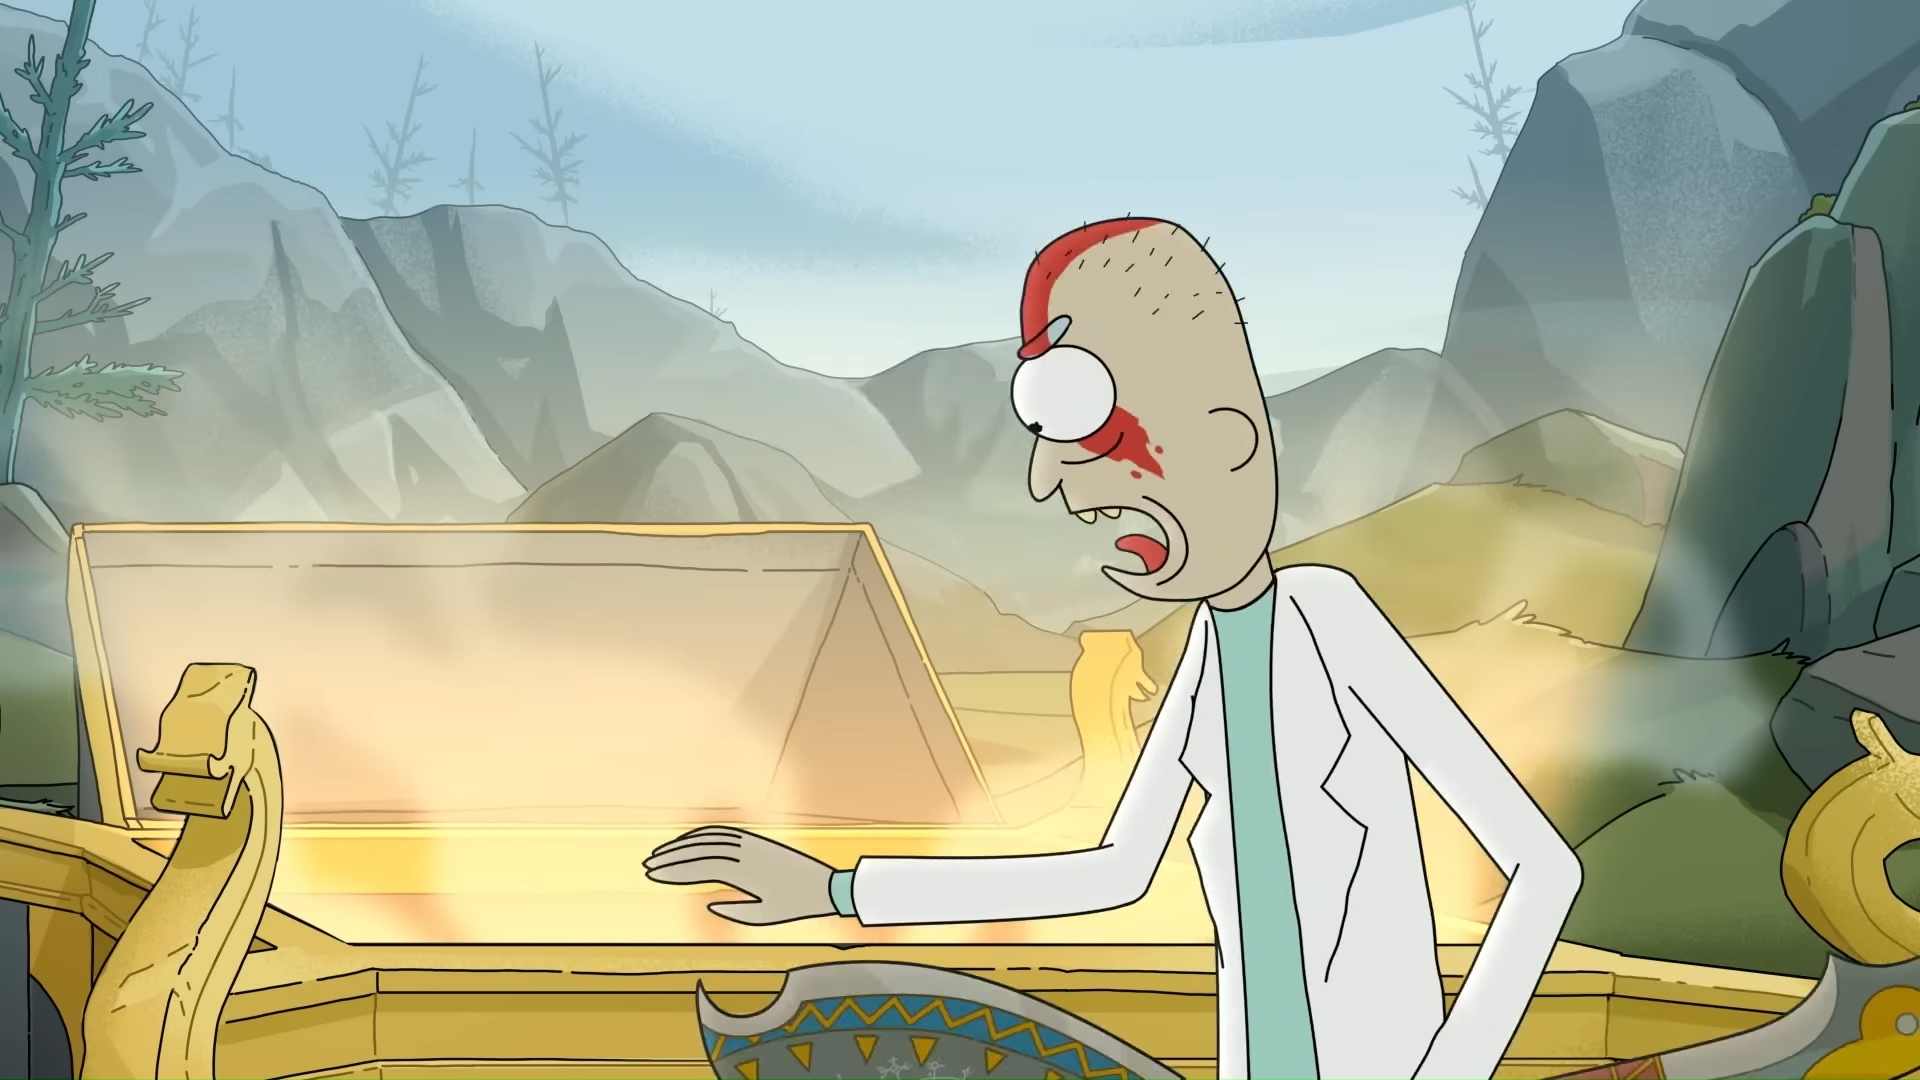 Rick and Morty meets God of War Ragnarok in this New Trailer